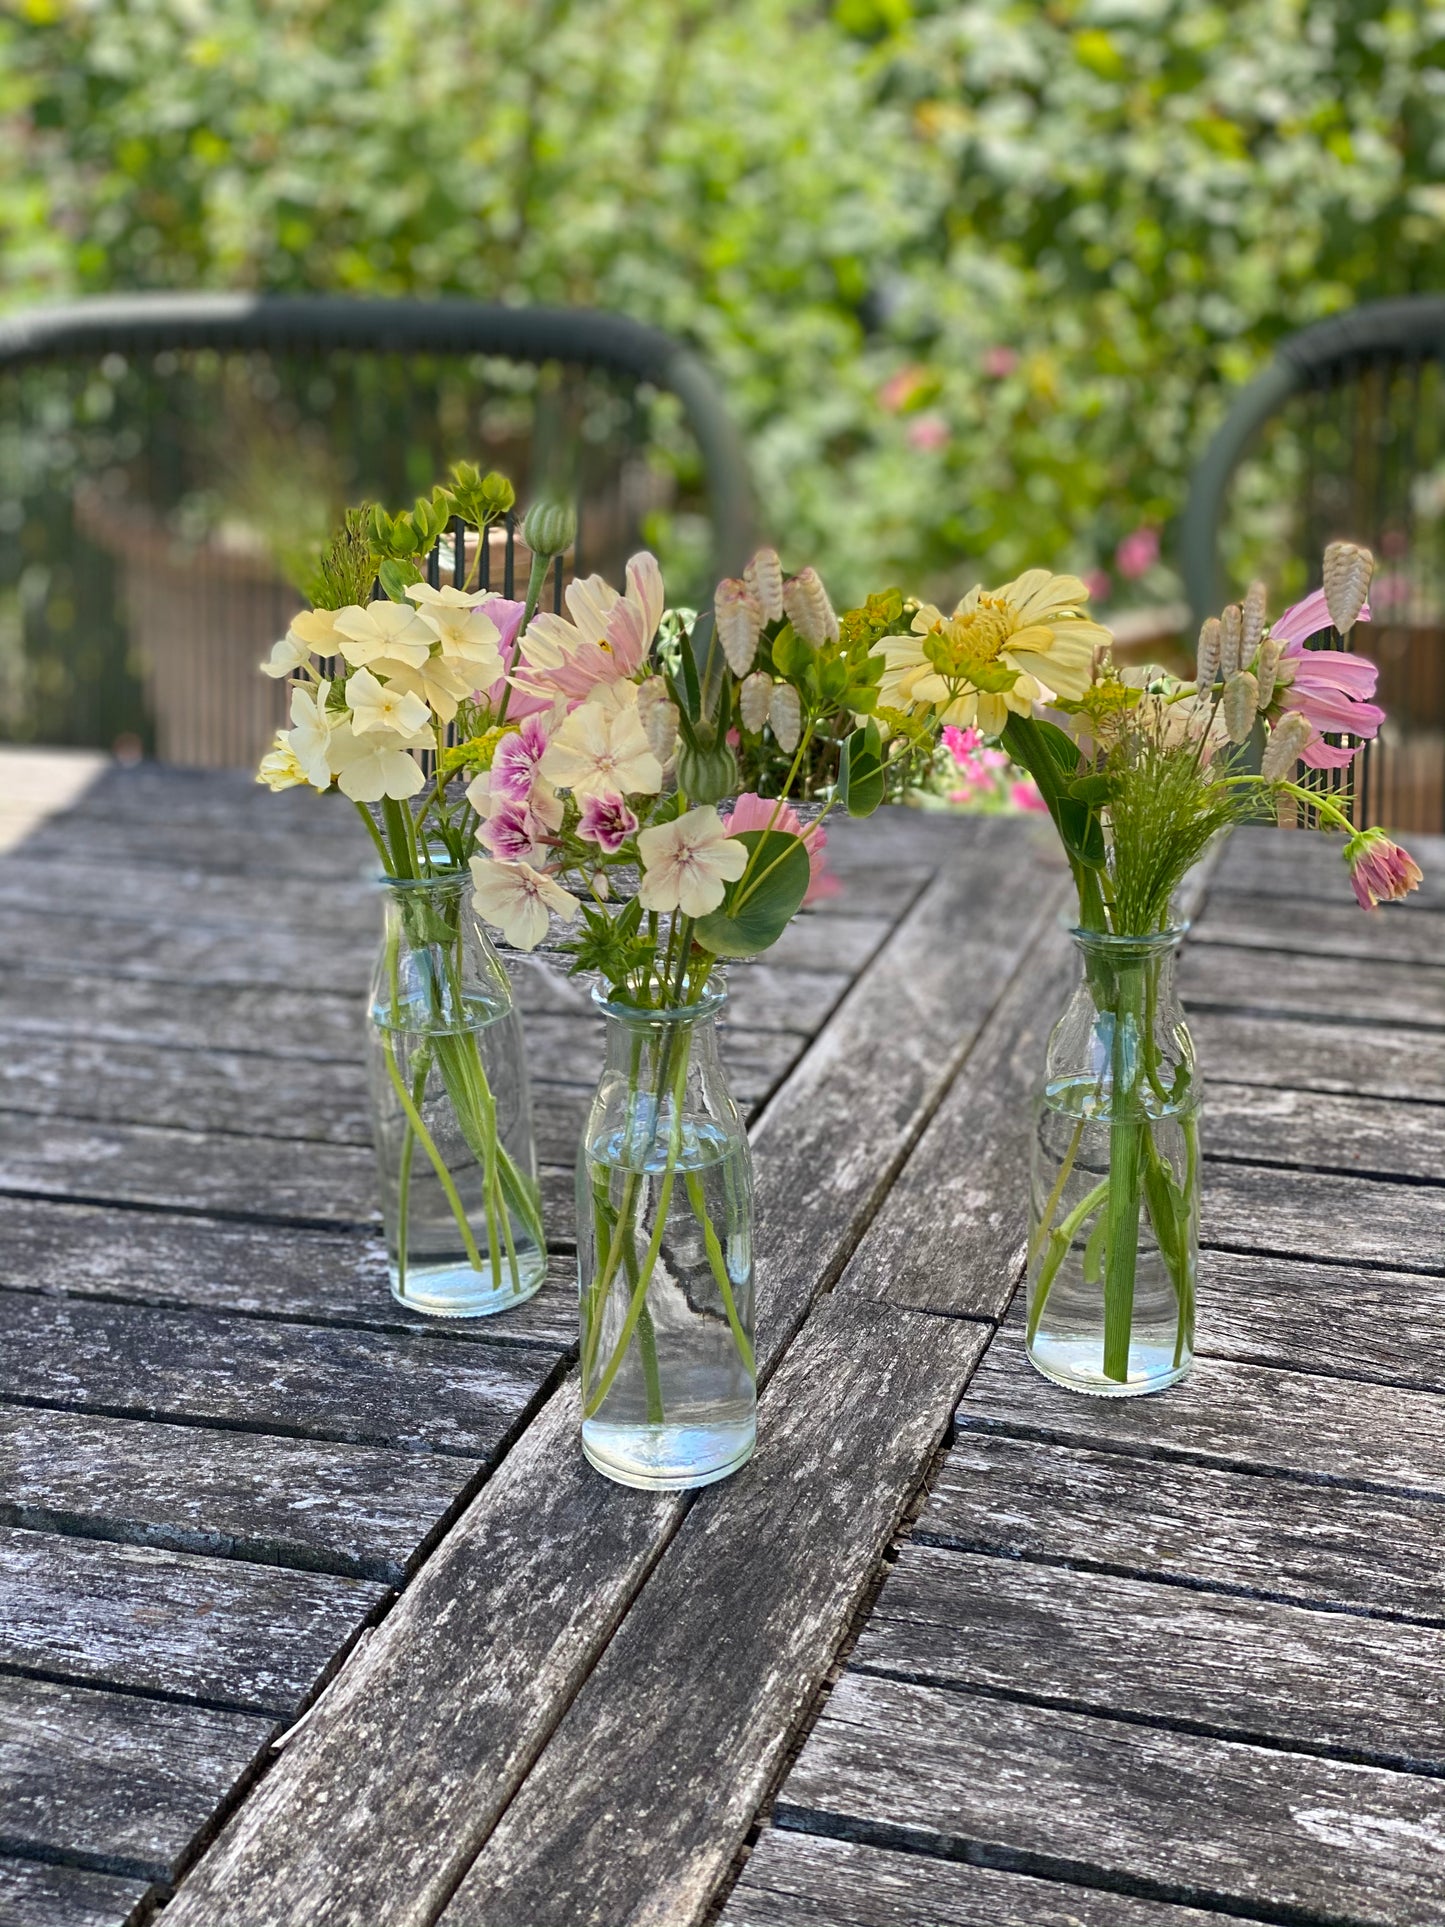 Filled small table vases with fresh flowers